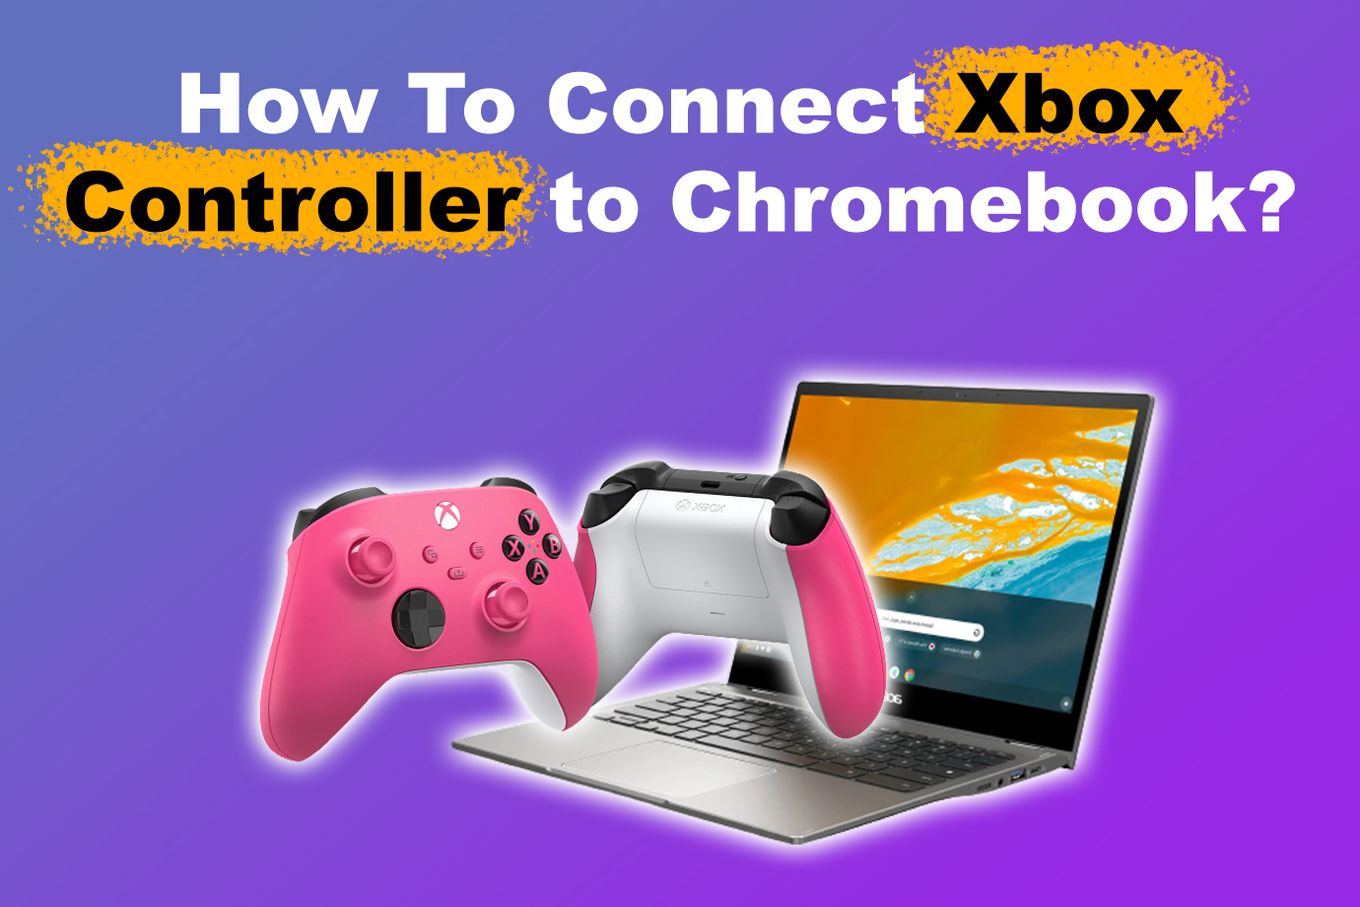 How To Connect Xbox Controller to Chromebook